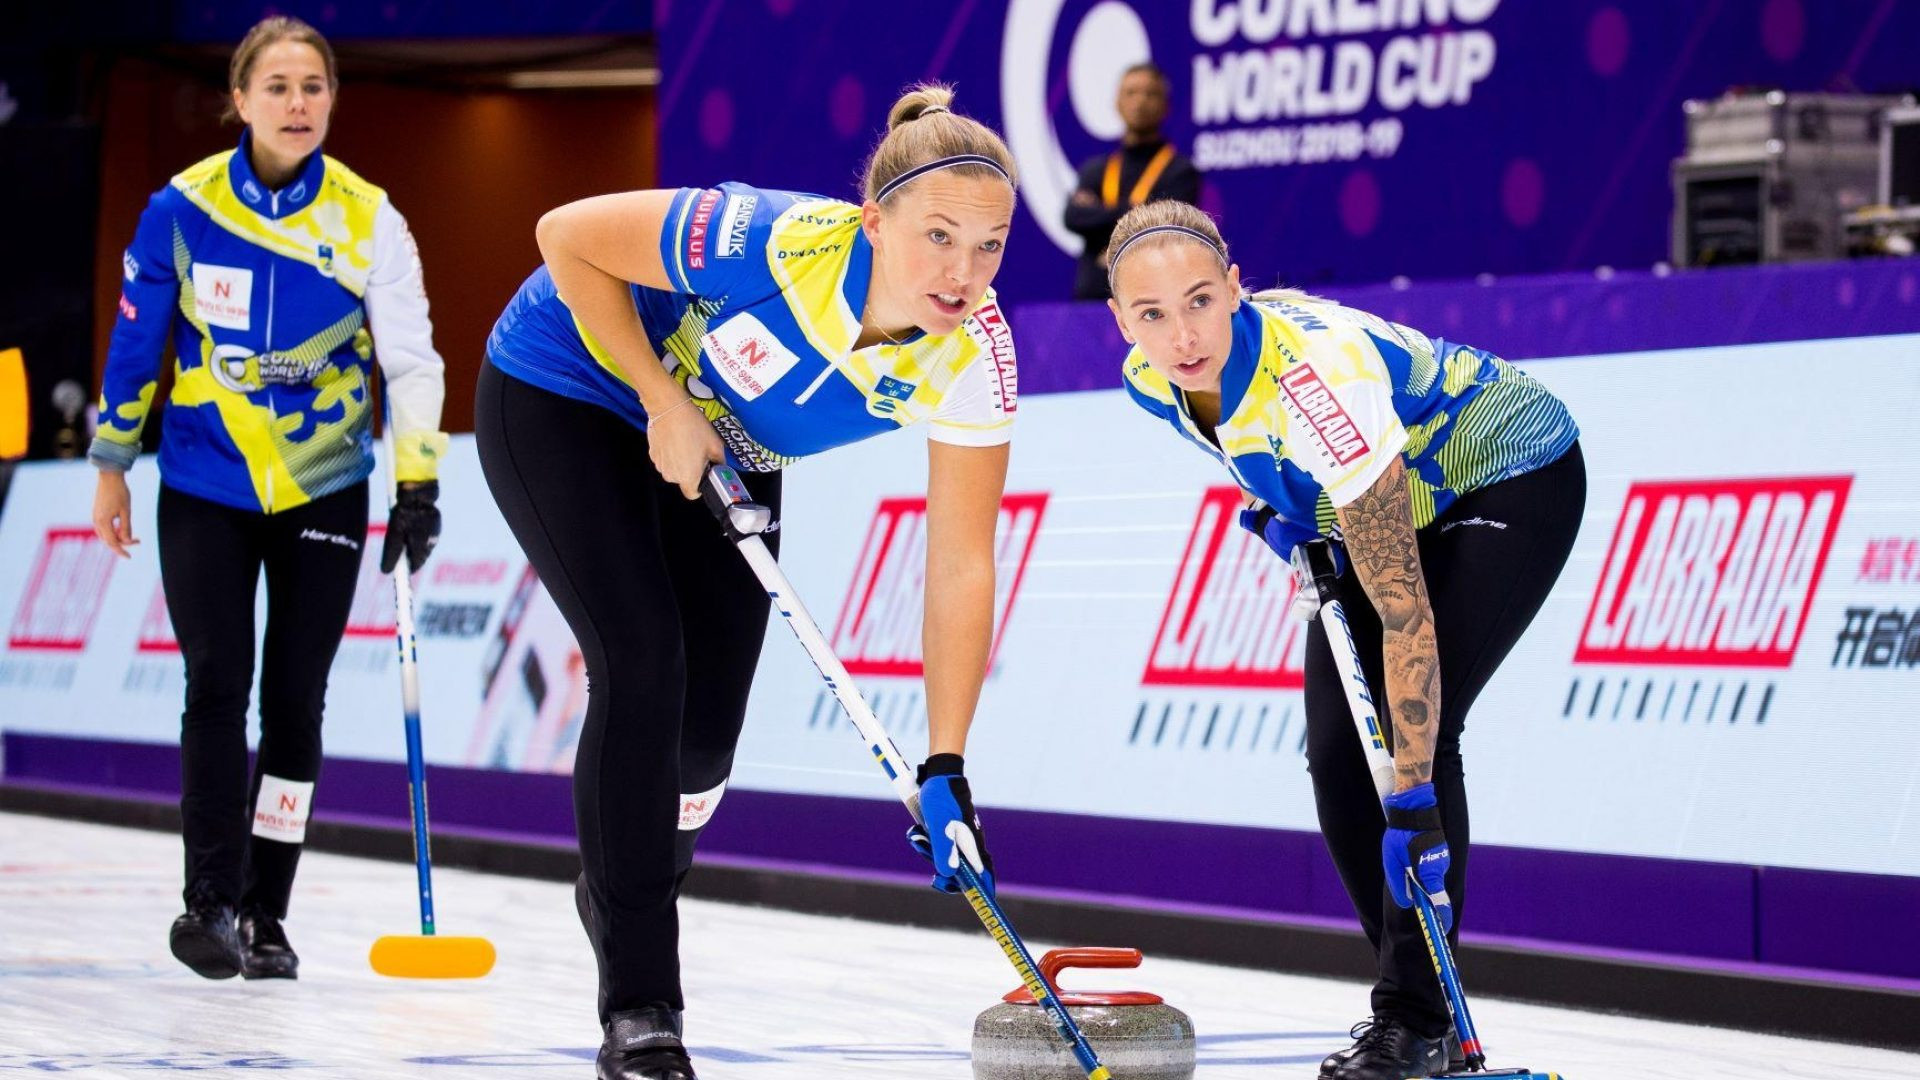 Sweden's Olympic champion skip Anna Hasselborg began with victory as the first event of the inaugural Curling World Cup began ©WCF